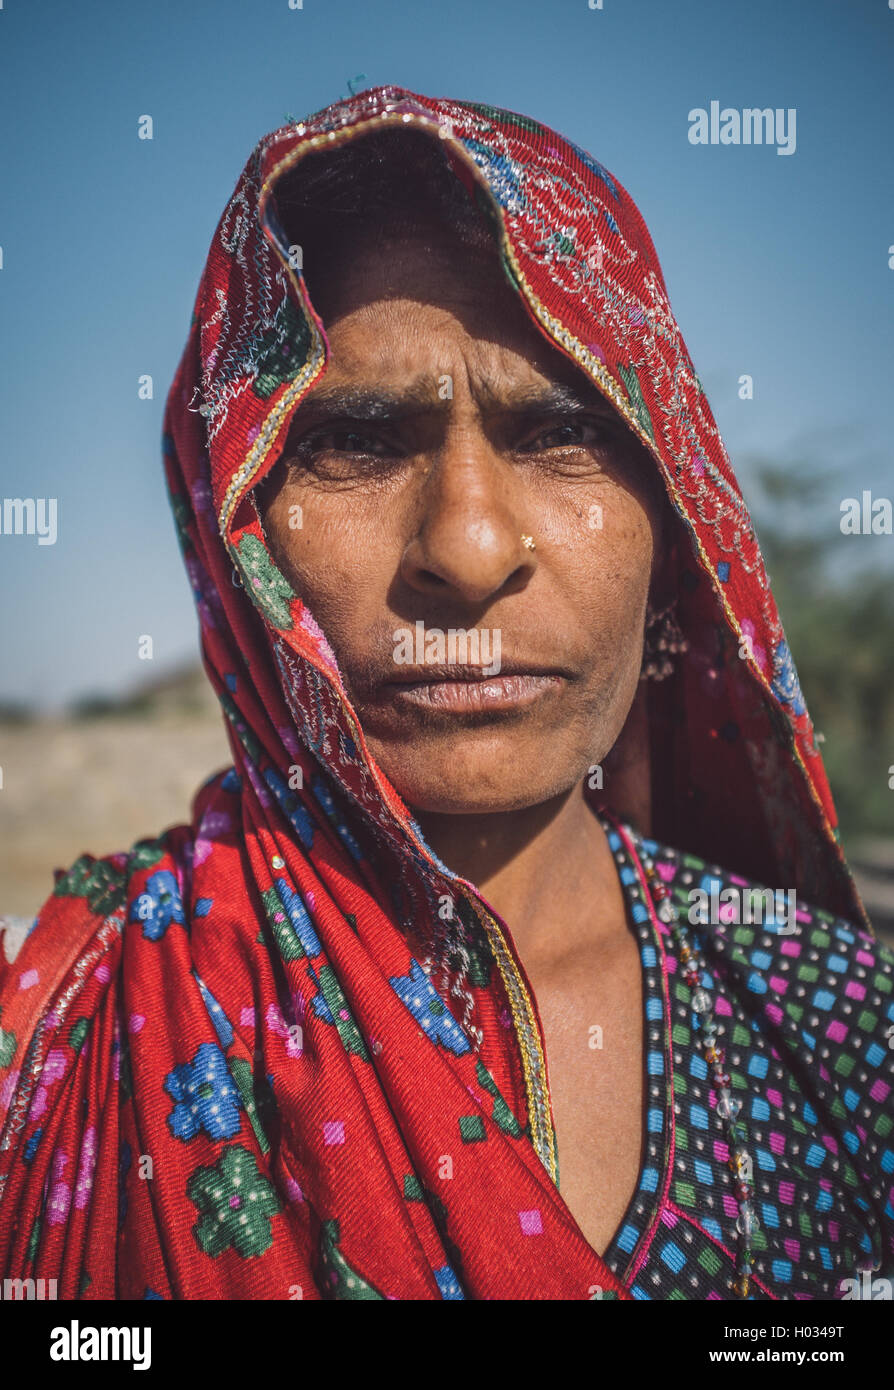 GODWAR REGION, INDIA - 14 FEBRUARY 2015: Rabari tribeswoman stands in field wearing saree. Post-processed with grain, texture an Stock Photo